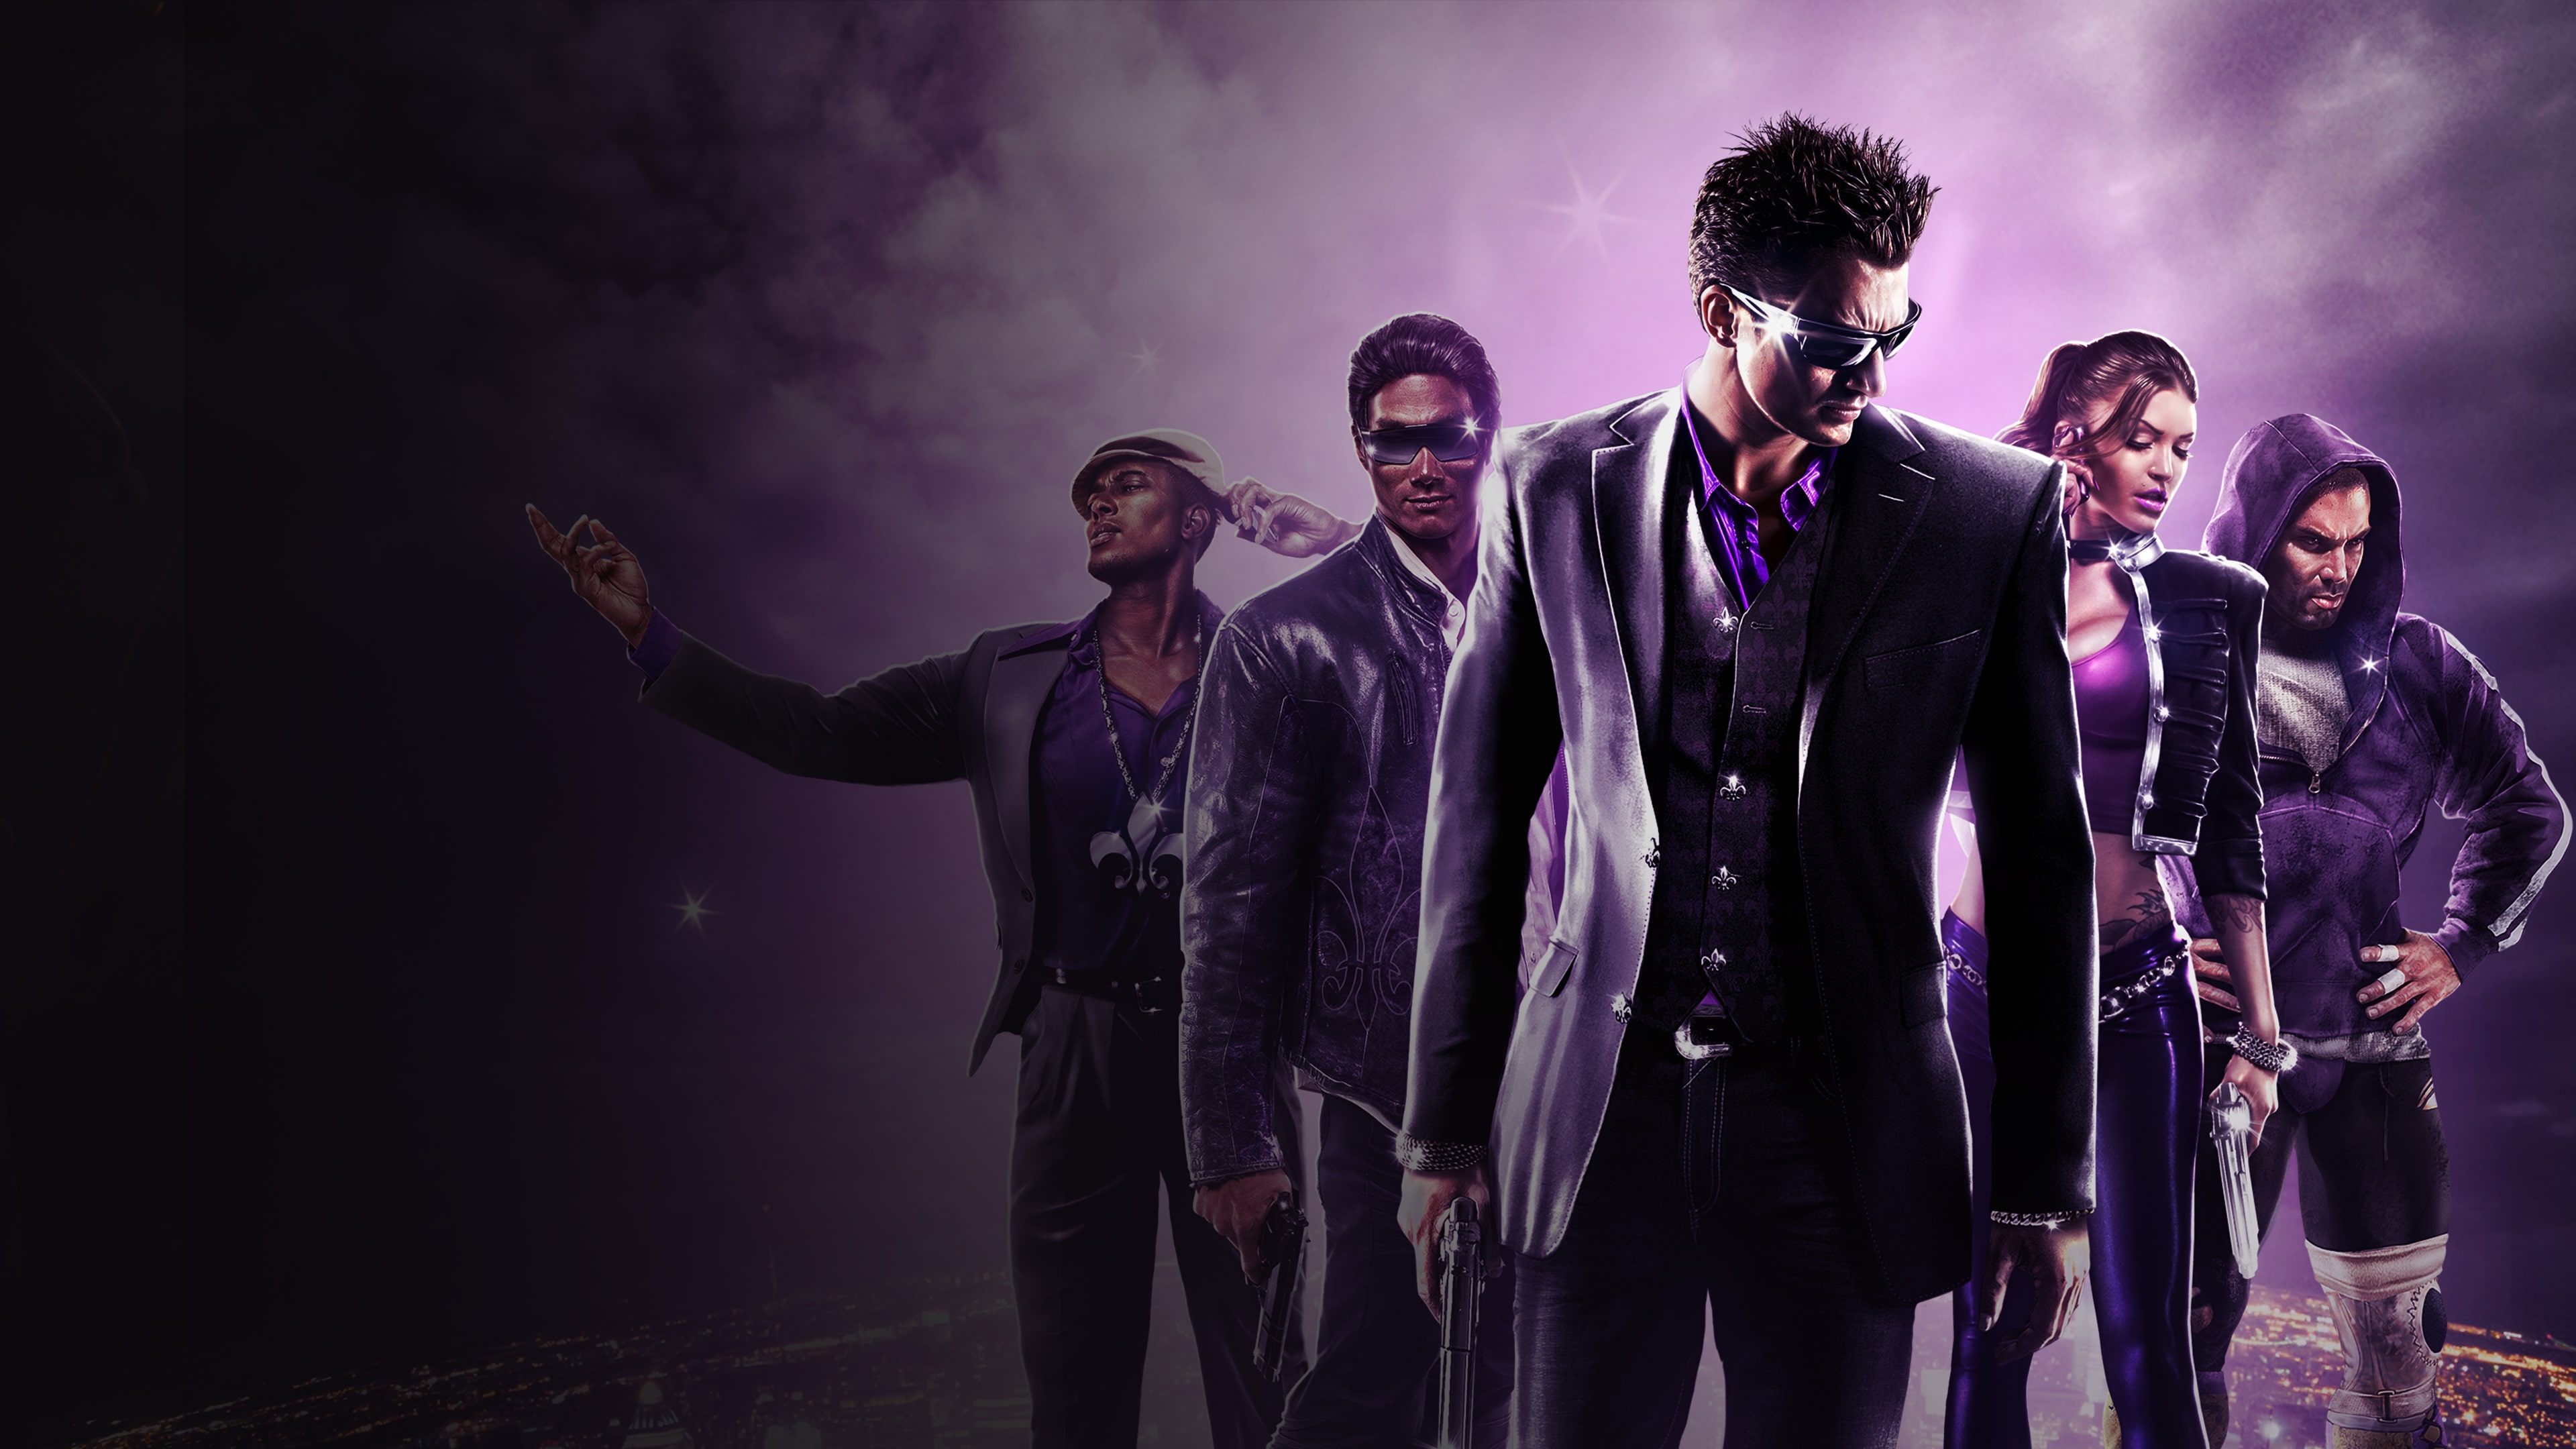 saints row the third remastered ps4 store